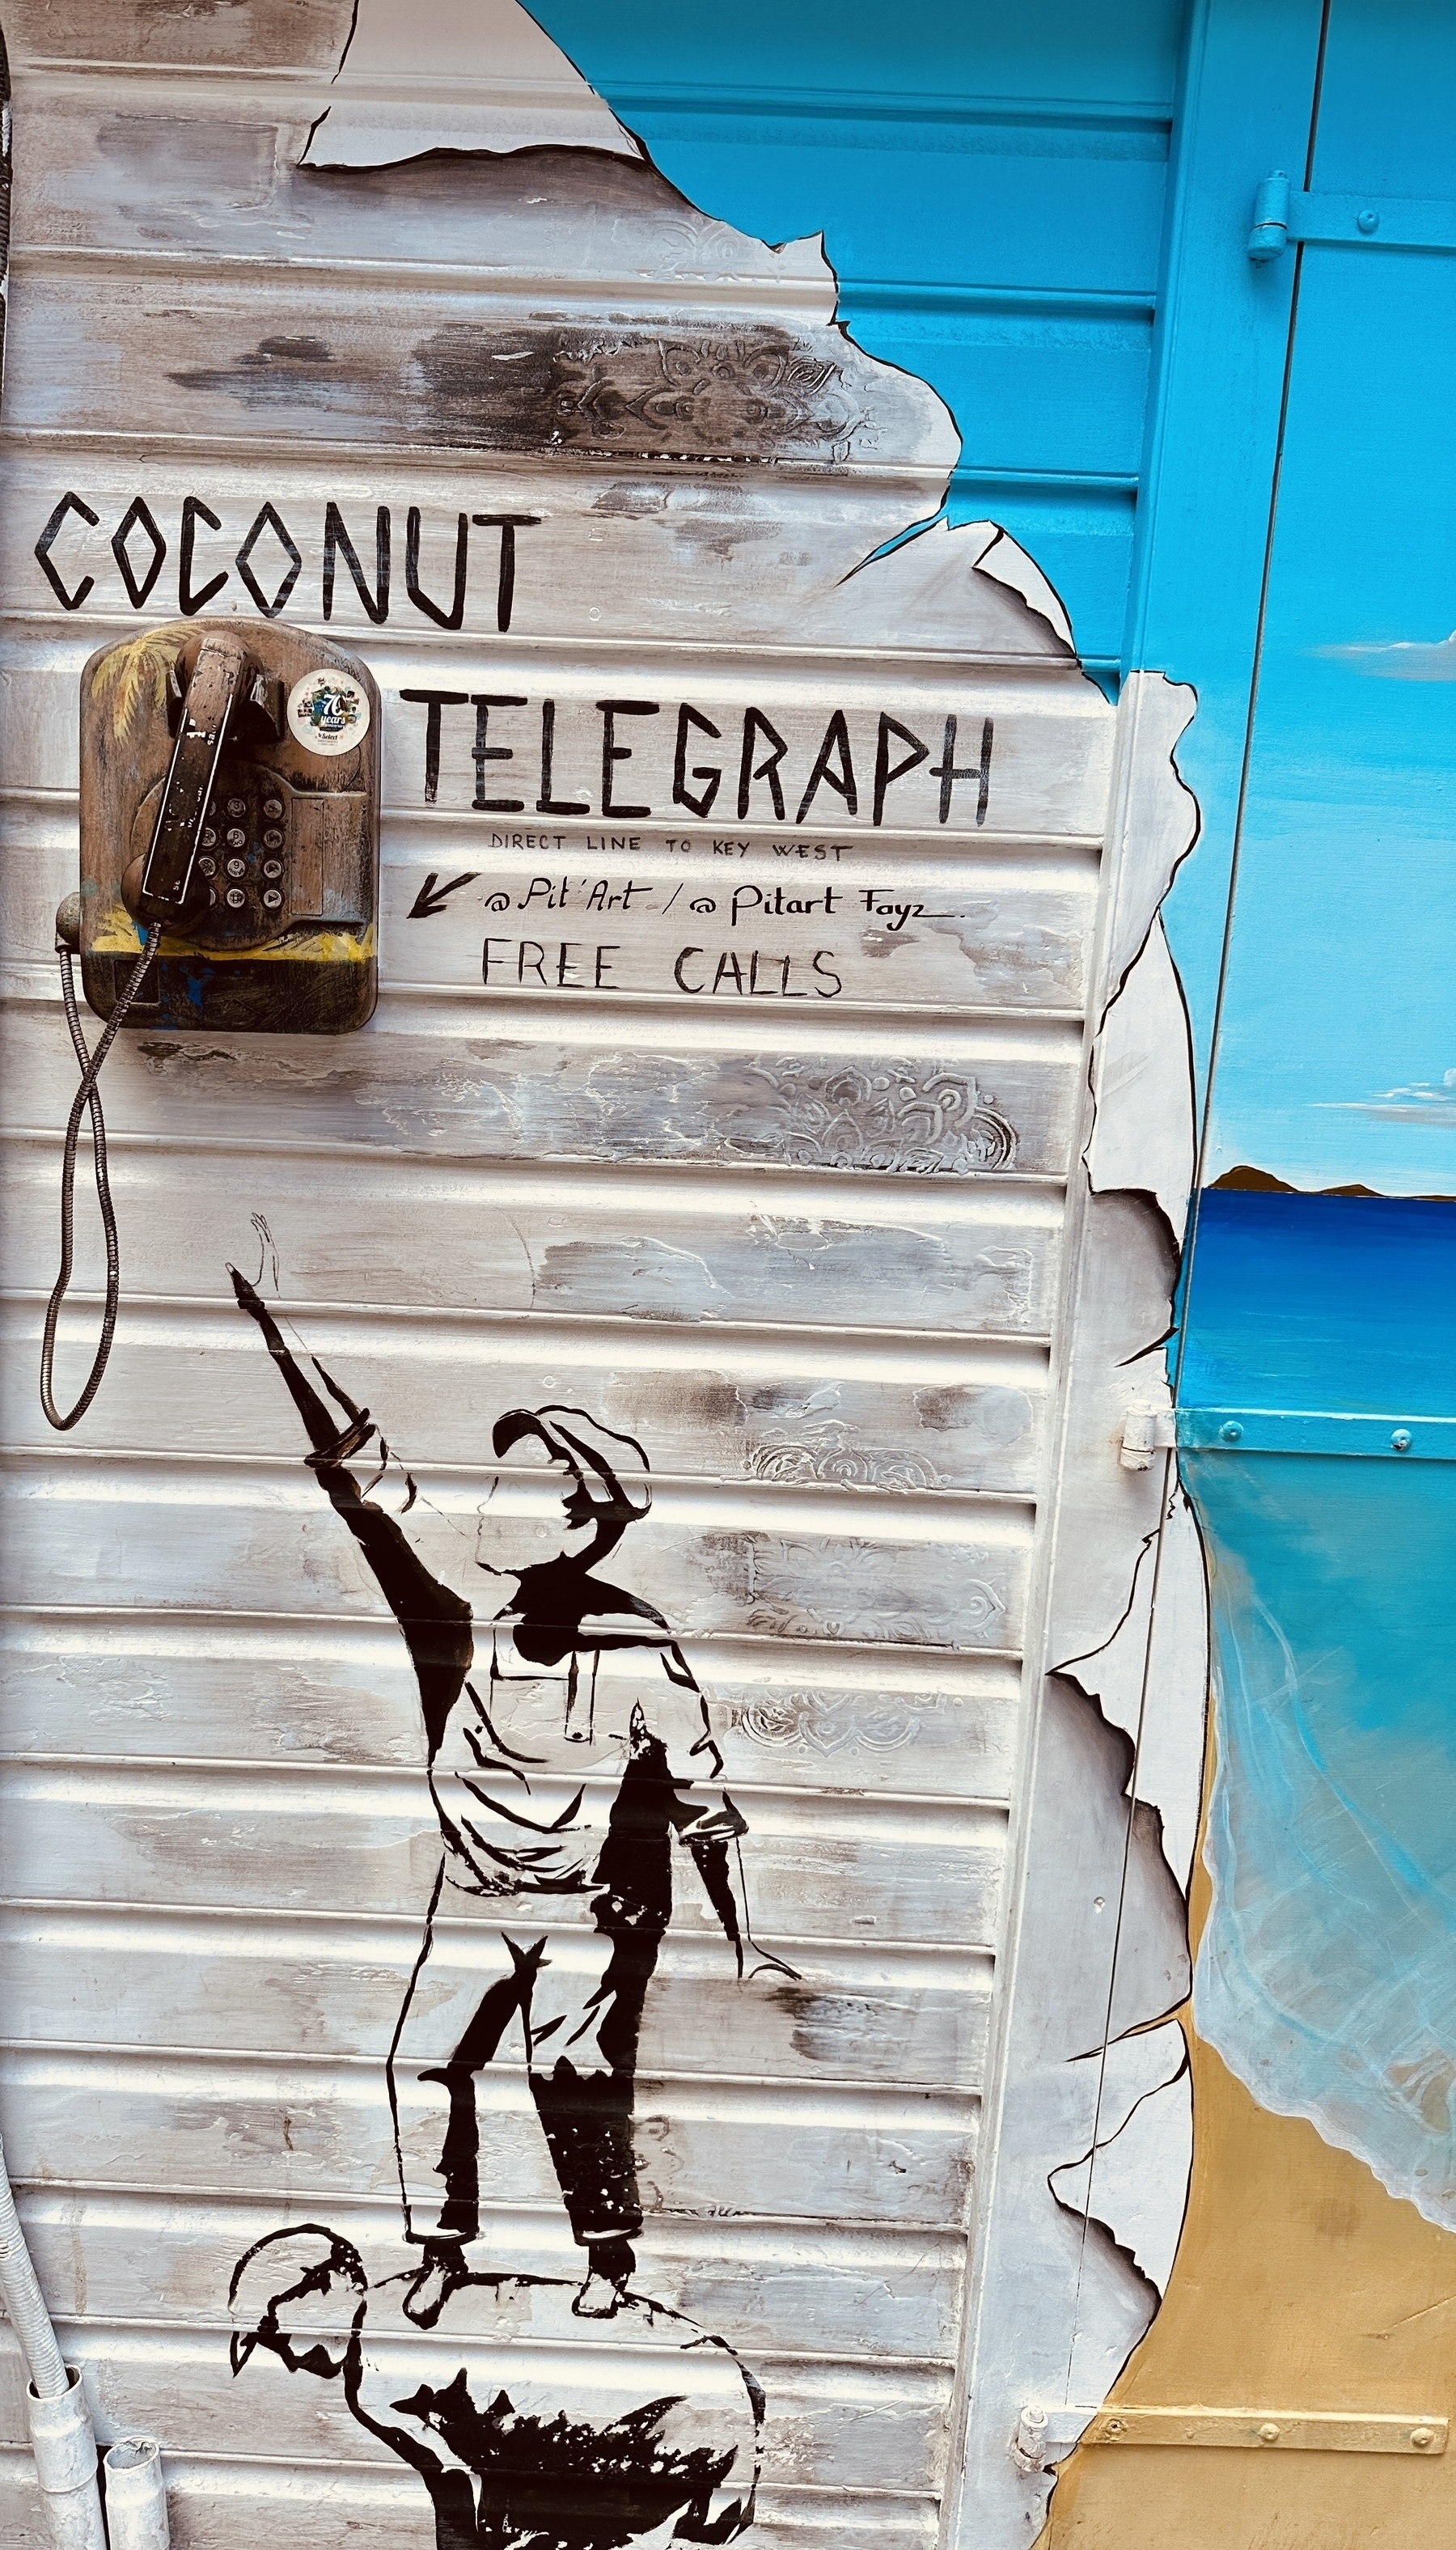 Mural on a building in St. Bart’s: from the top “Coconut Telegraph” written above what looks like an old-fashioned pay phone with two male looking characters, one bending forward in order to be a lift for the second who is reaching for the phone. Additional text reads “direct line to Key West” and “Free Calls”. Below that, socials for @Pit’Art / @pitart foyez. 